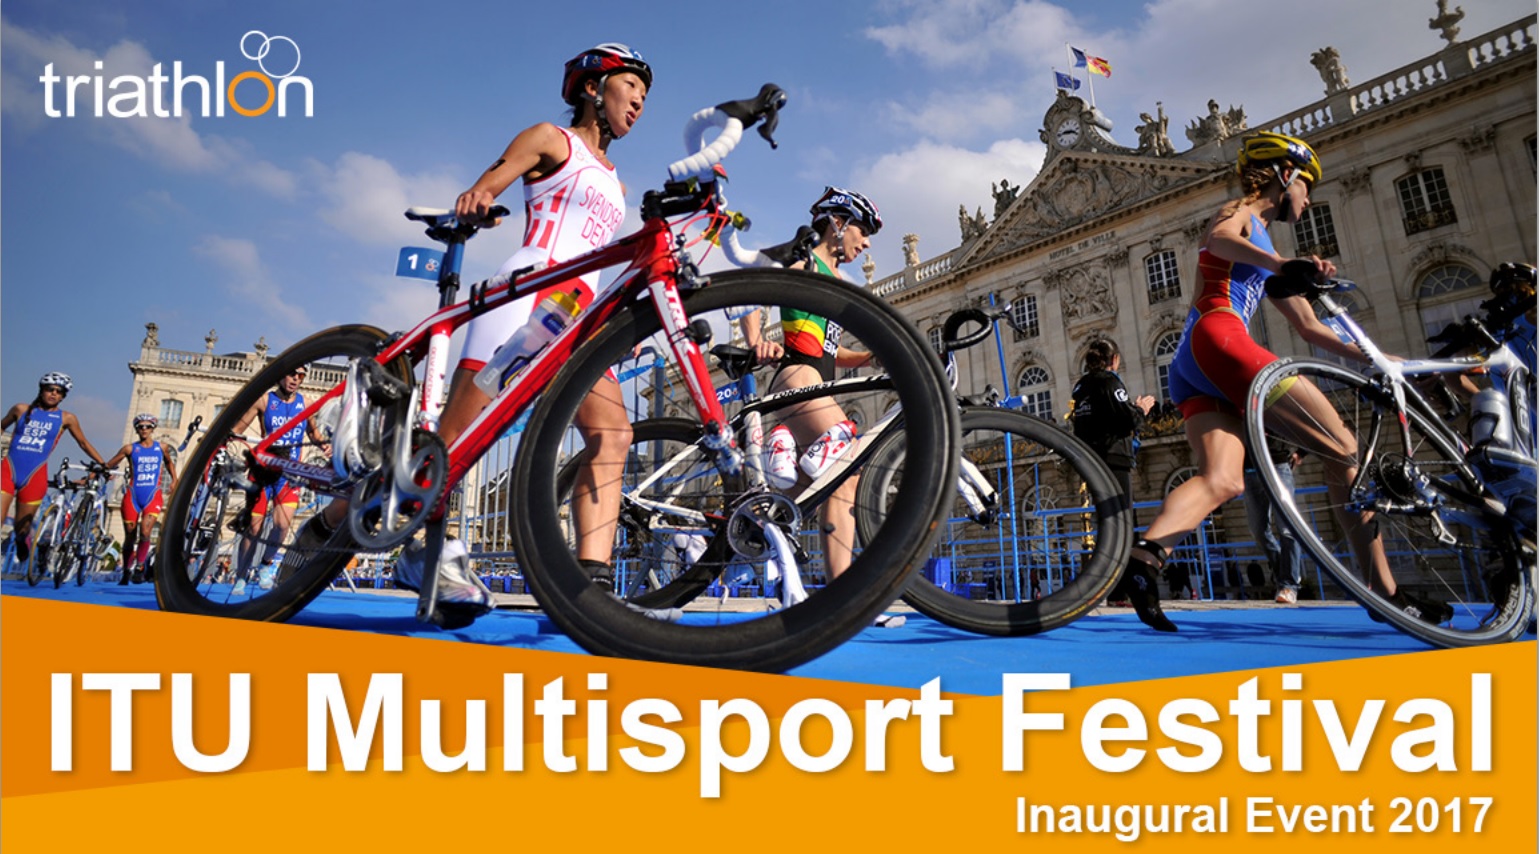 The ITU has announced a new Multisport World Championship Festival which will debut in 2017 ©ITU